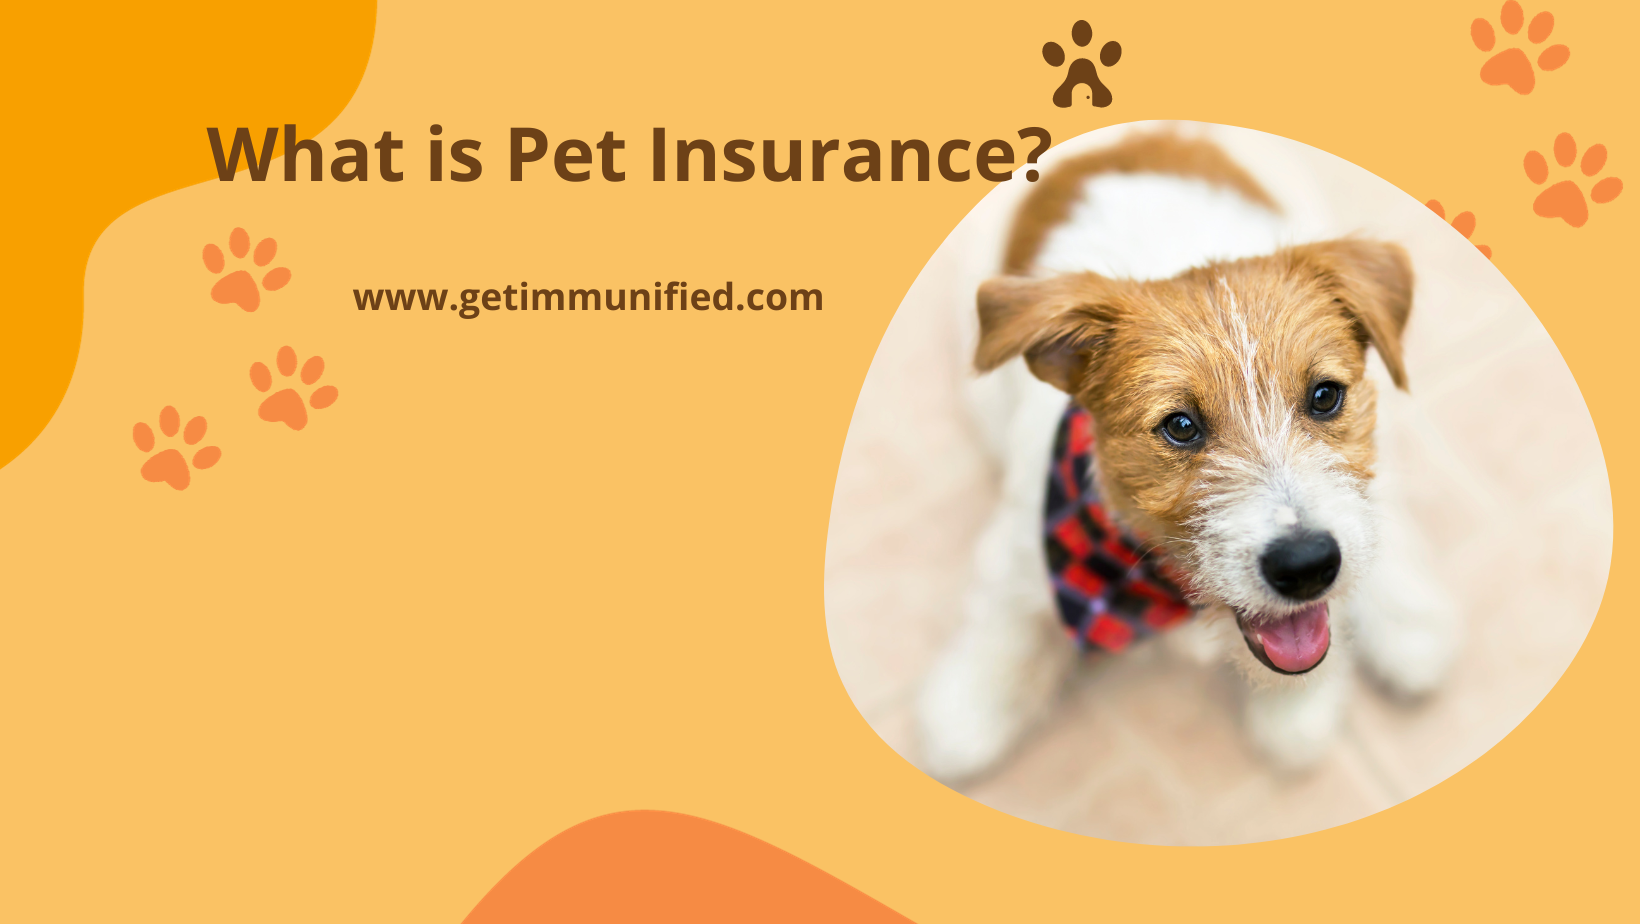 Free Pet Insurance for Low-Income families